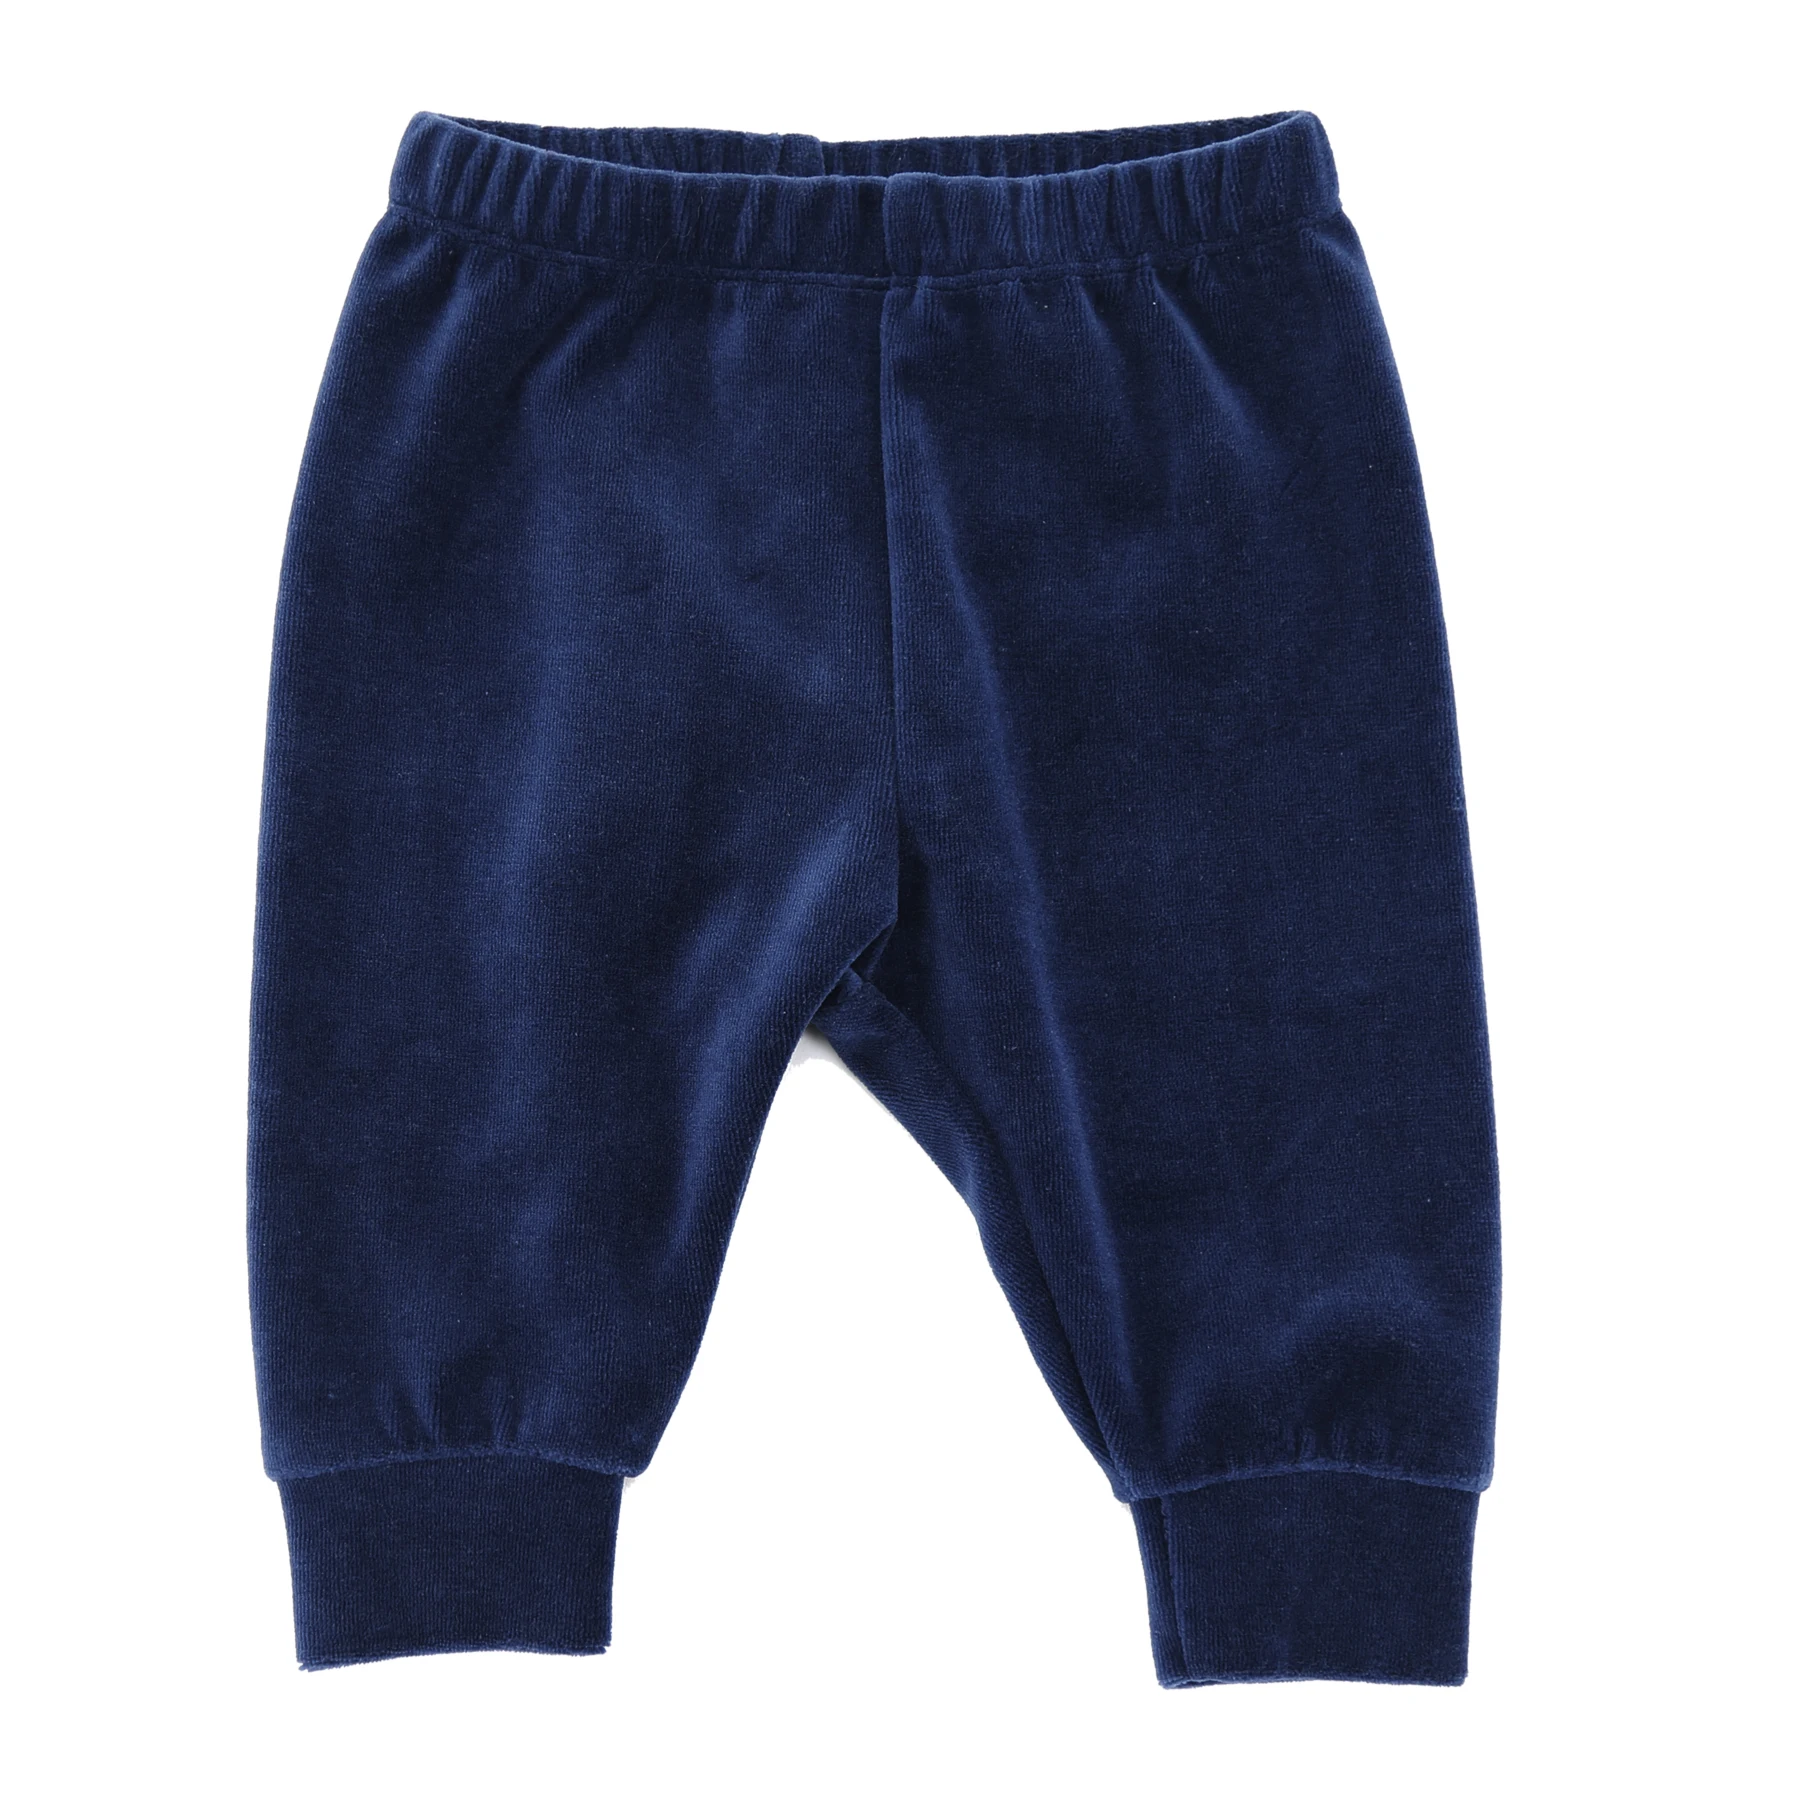 MOSCHINO BABY: pants in stretch cotton - Black | Moschino Baby pants  M3P02NLBA11 online at GIGLIO.COM